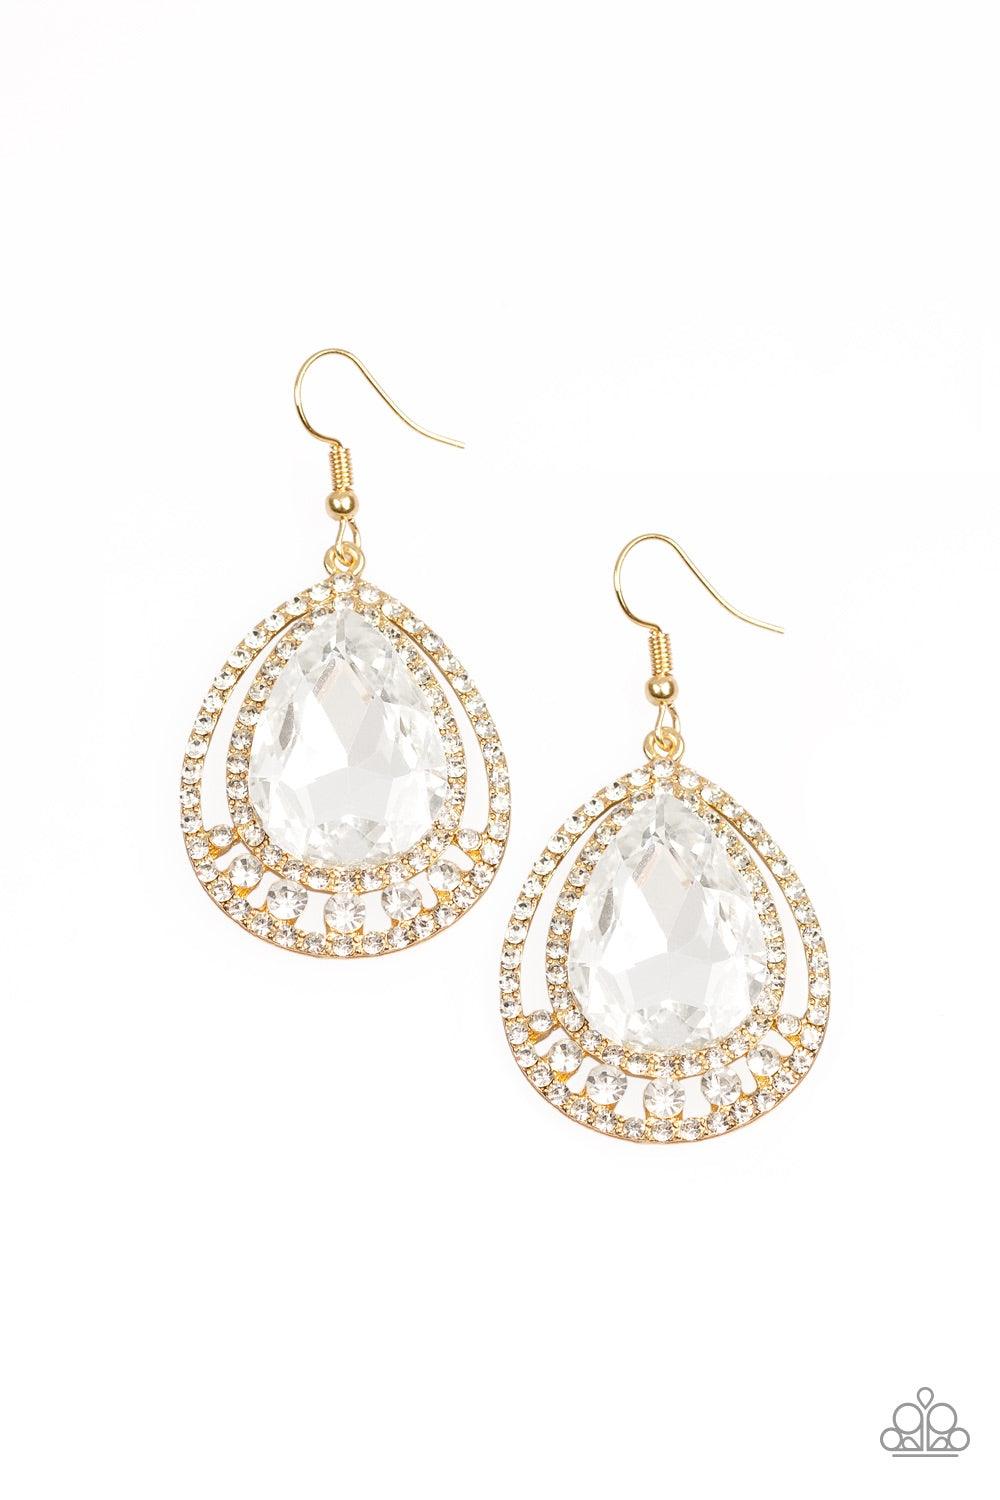 Paparazzi Accessories All Rise For Her Majesty - Gold A dramatically oversized white teardrop gem is nestled inside doubled gold frames radiating with glassy white rhinestones for a jaw-dropping style. Earring attaches to a standard fishhook fitting. Jewe